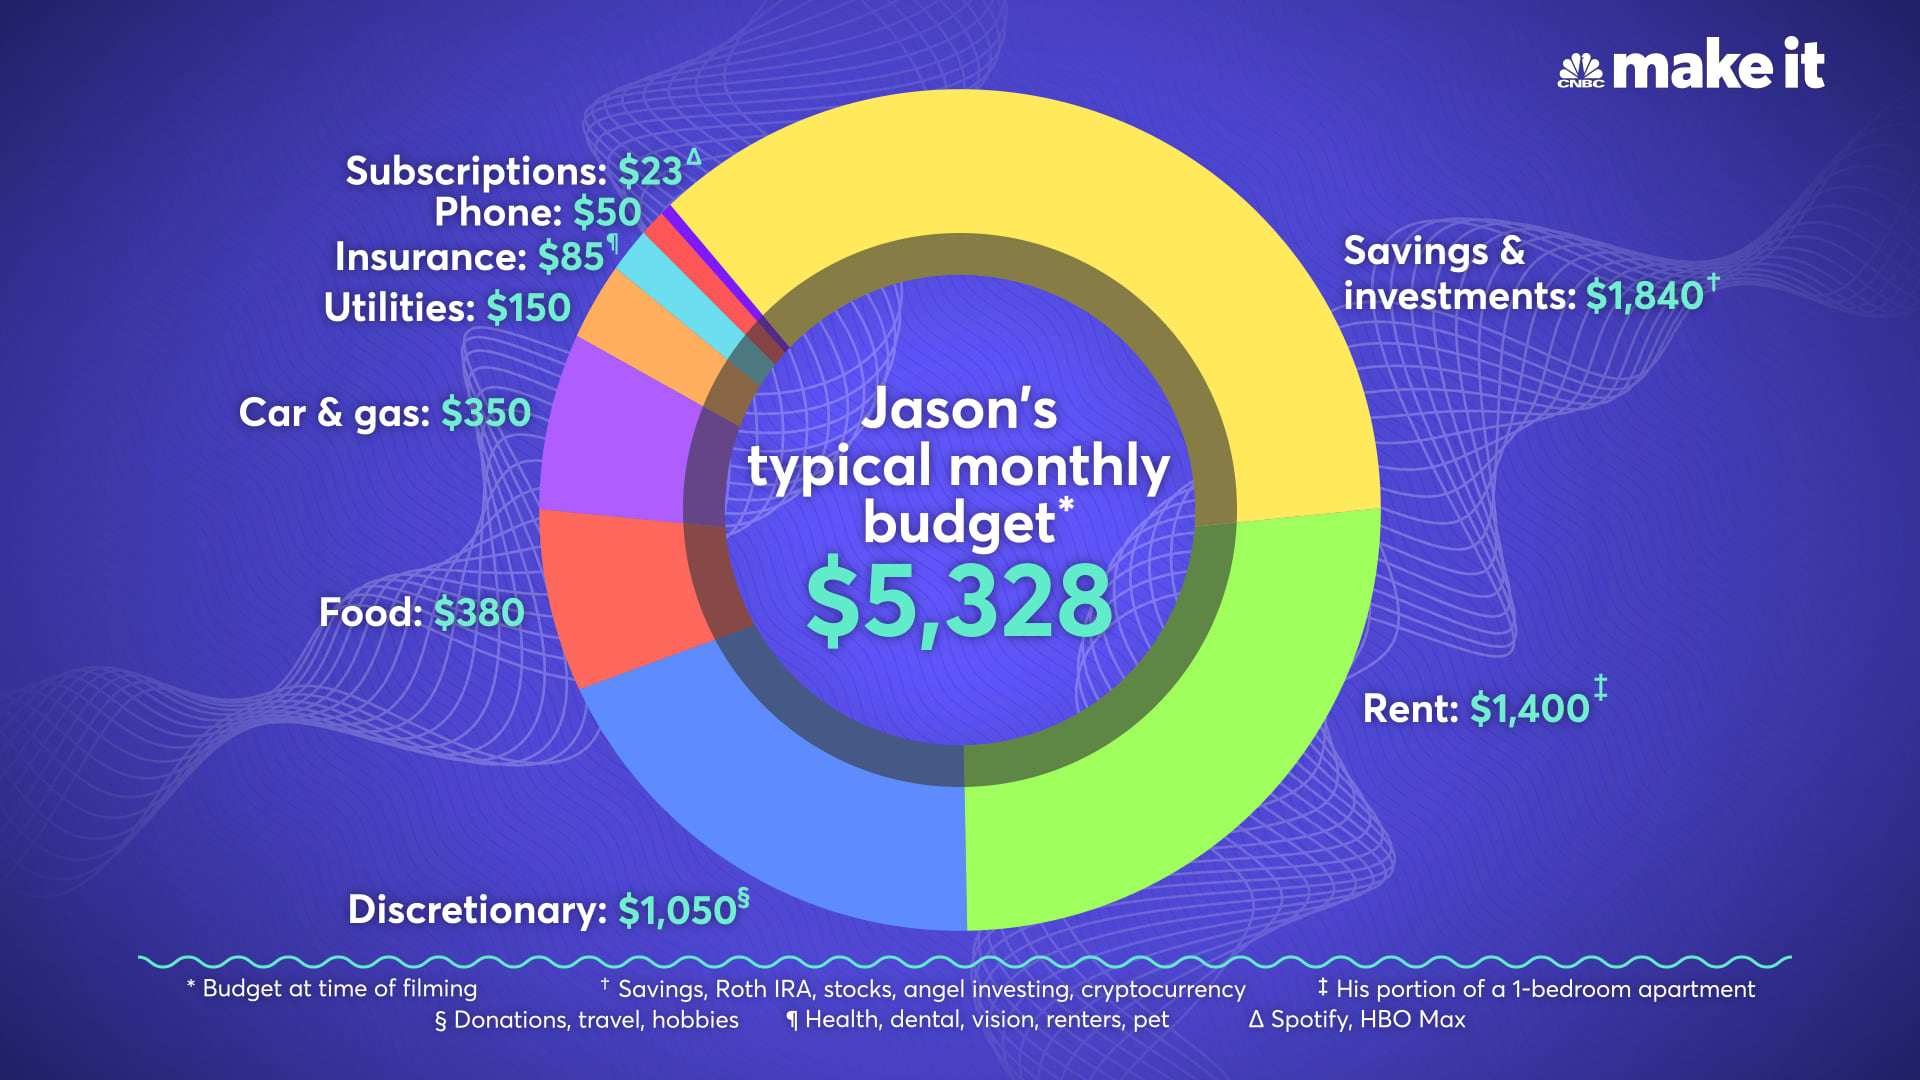 Jason Y. Lee's monthly budget as of April 2021.